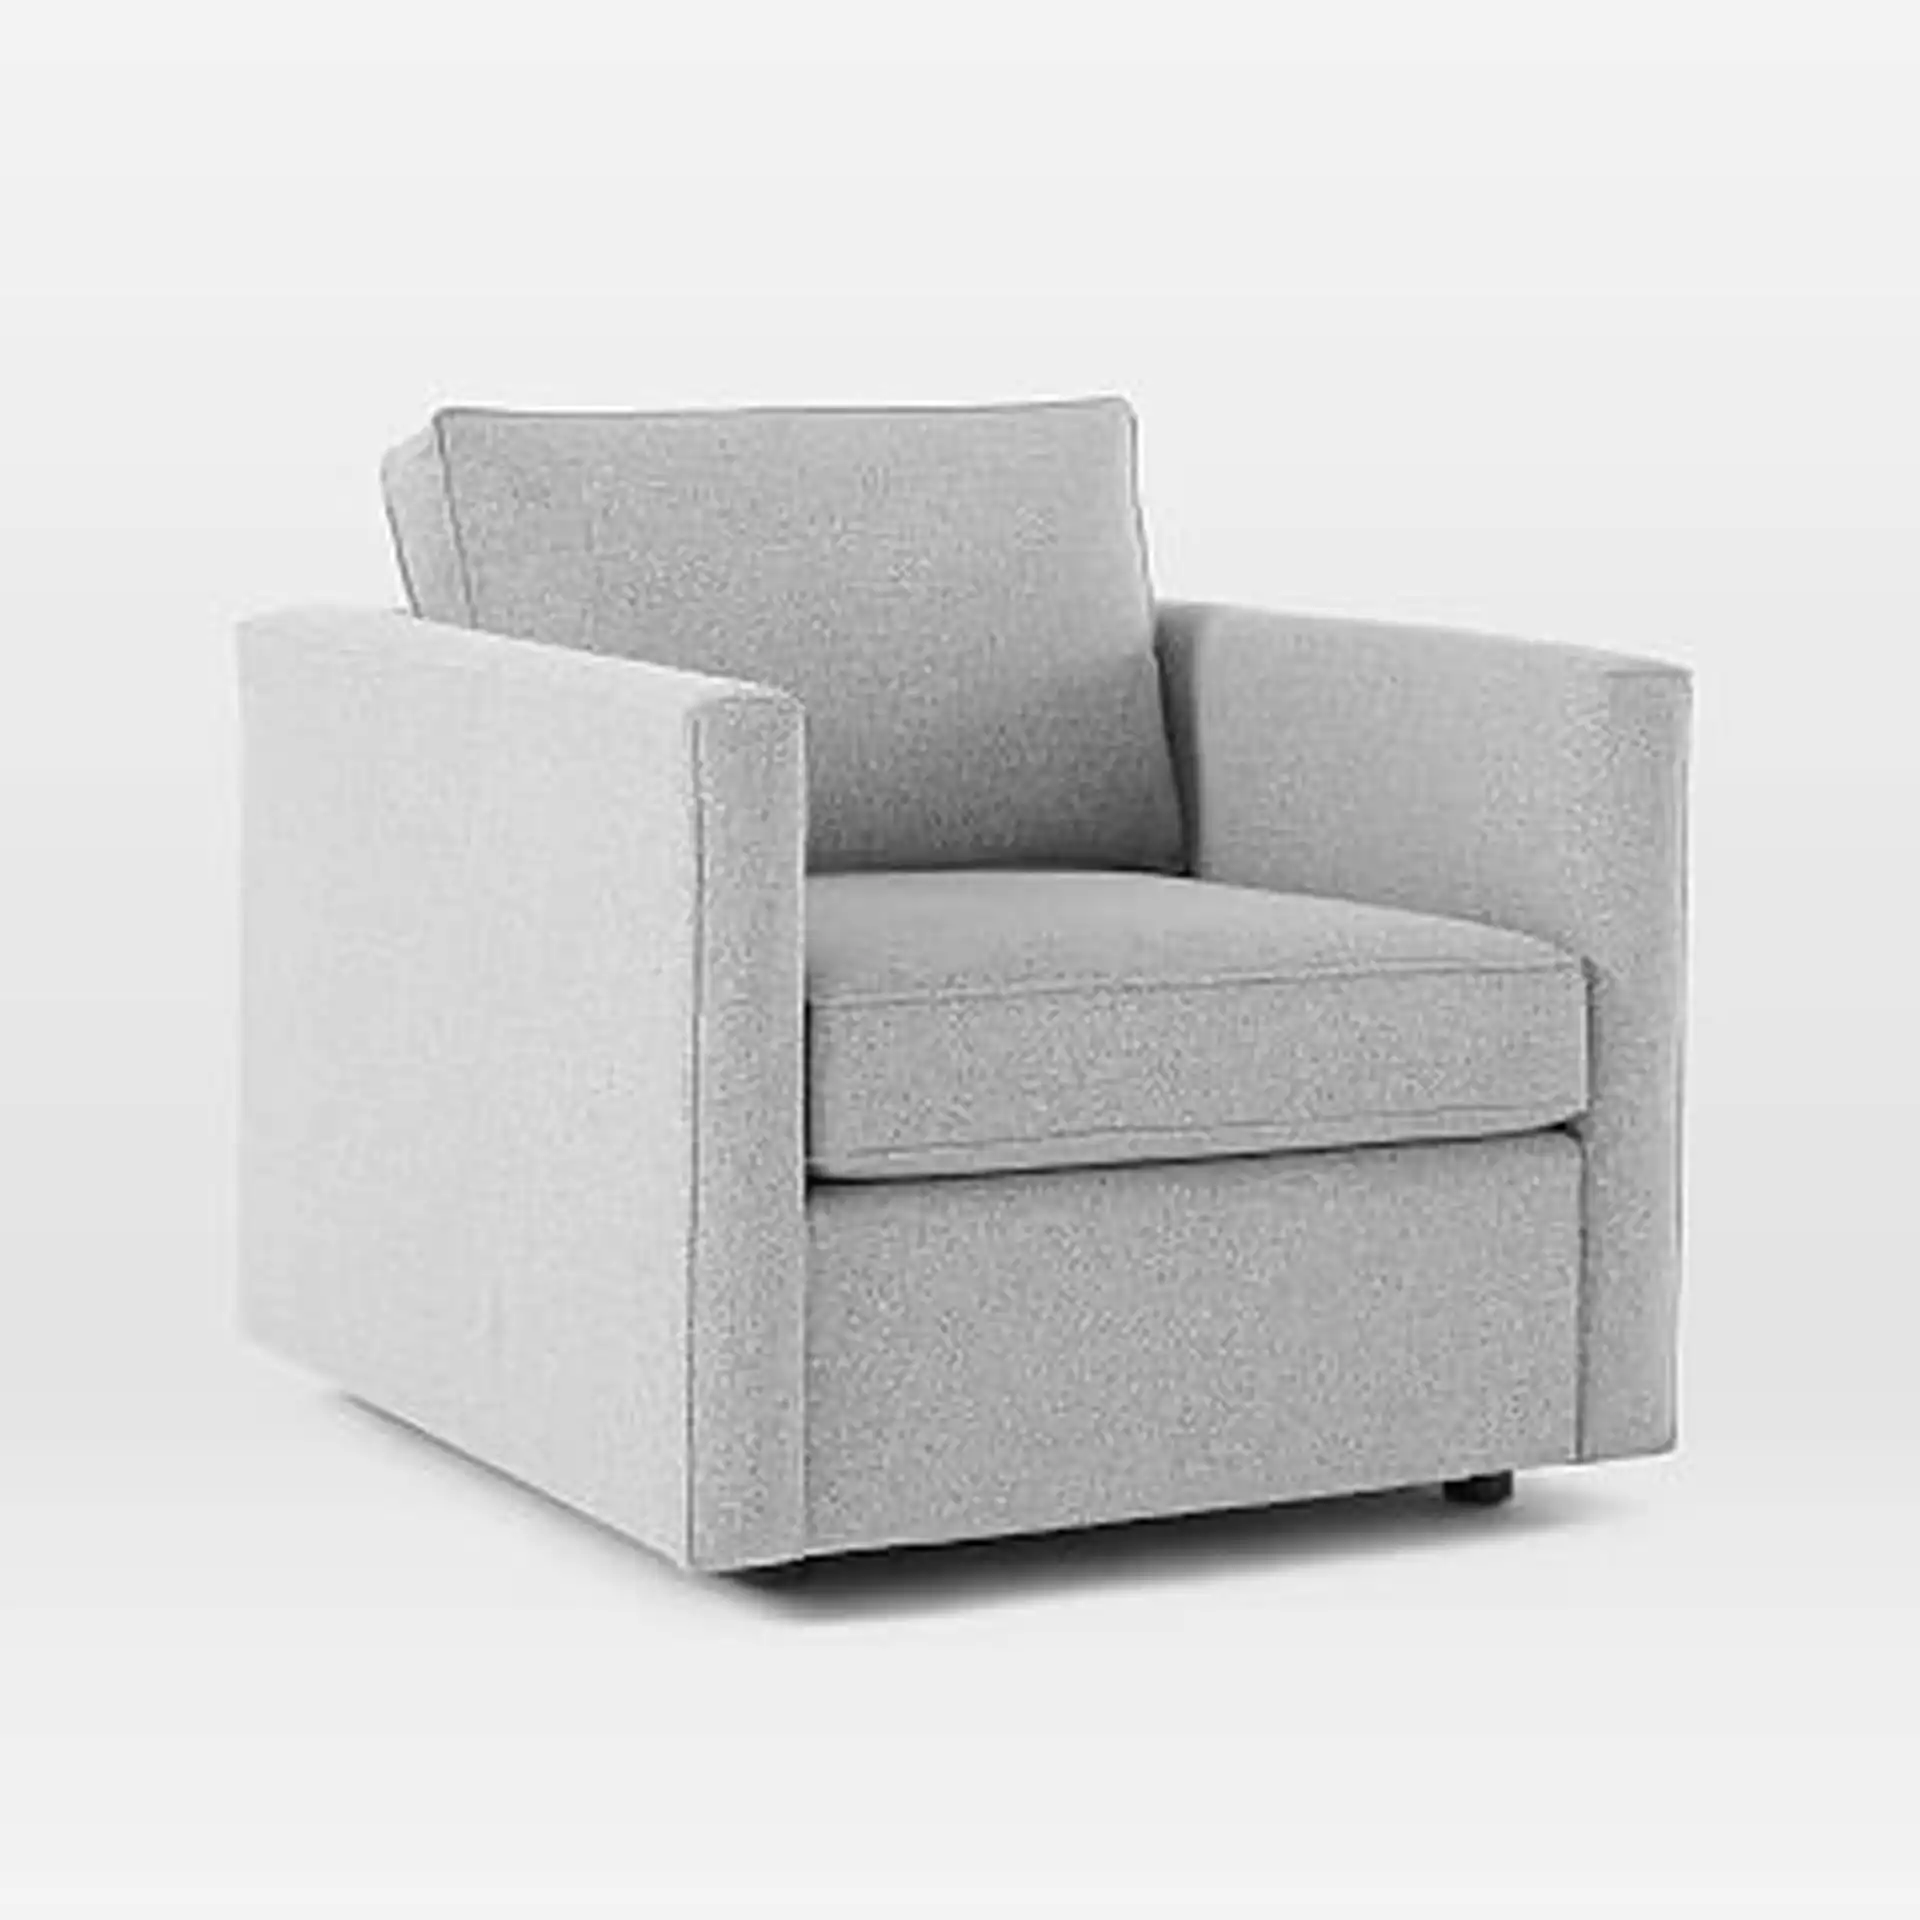 Harris Chair, Poly , Chenille Tweed, Storm Gray, Concealed Supports